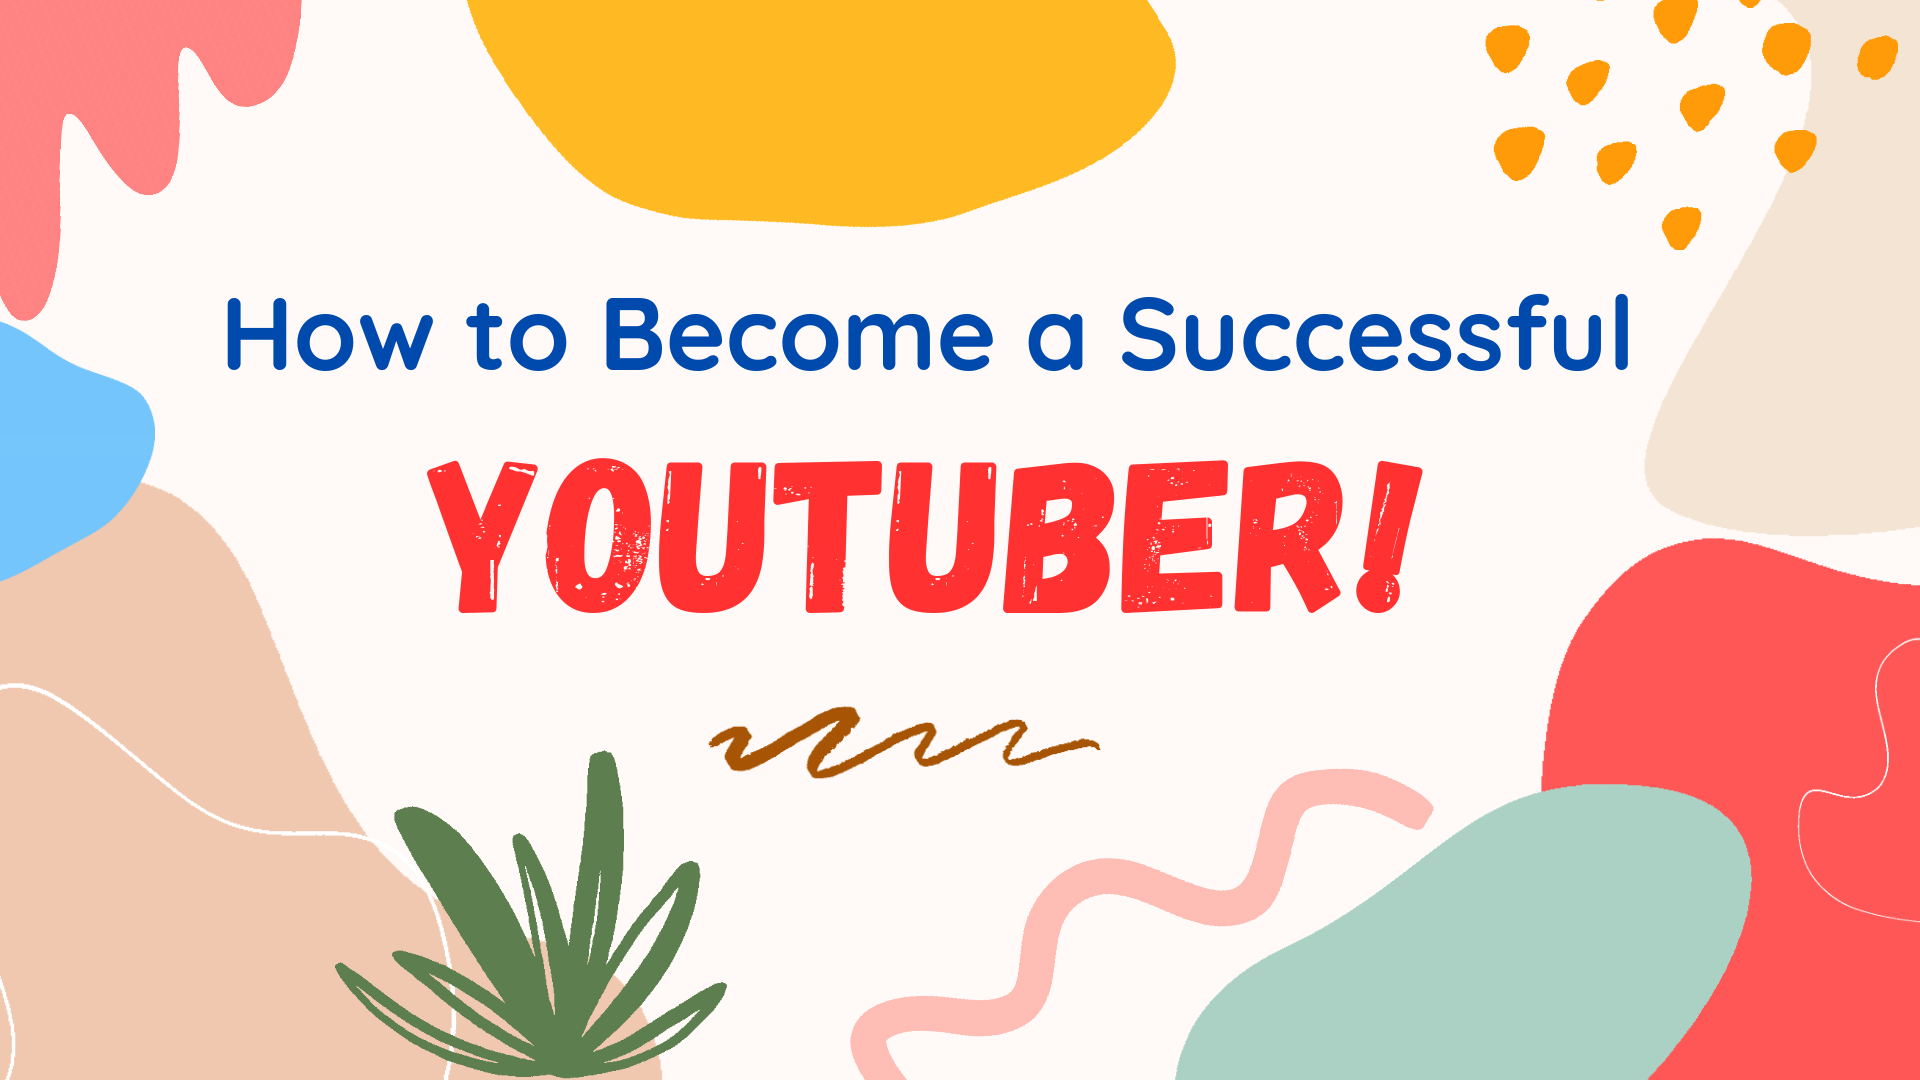 How to Become a Successful YouTuber!